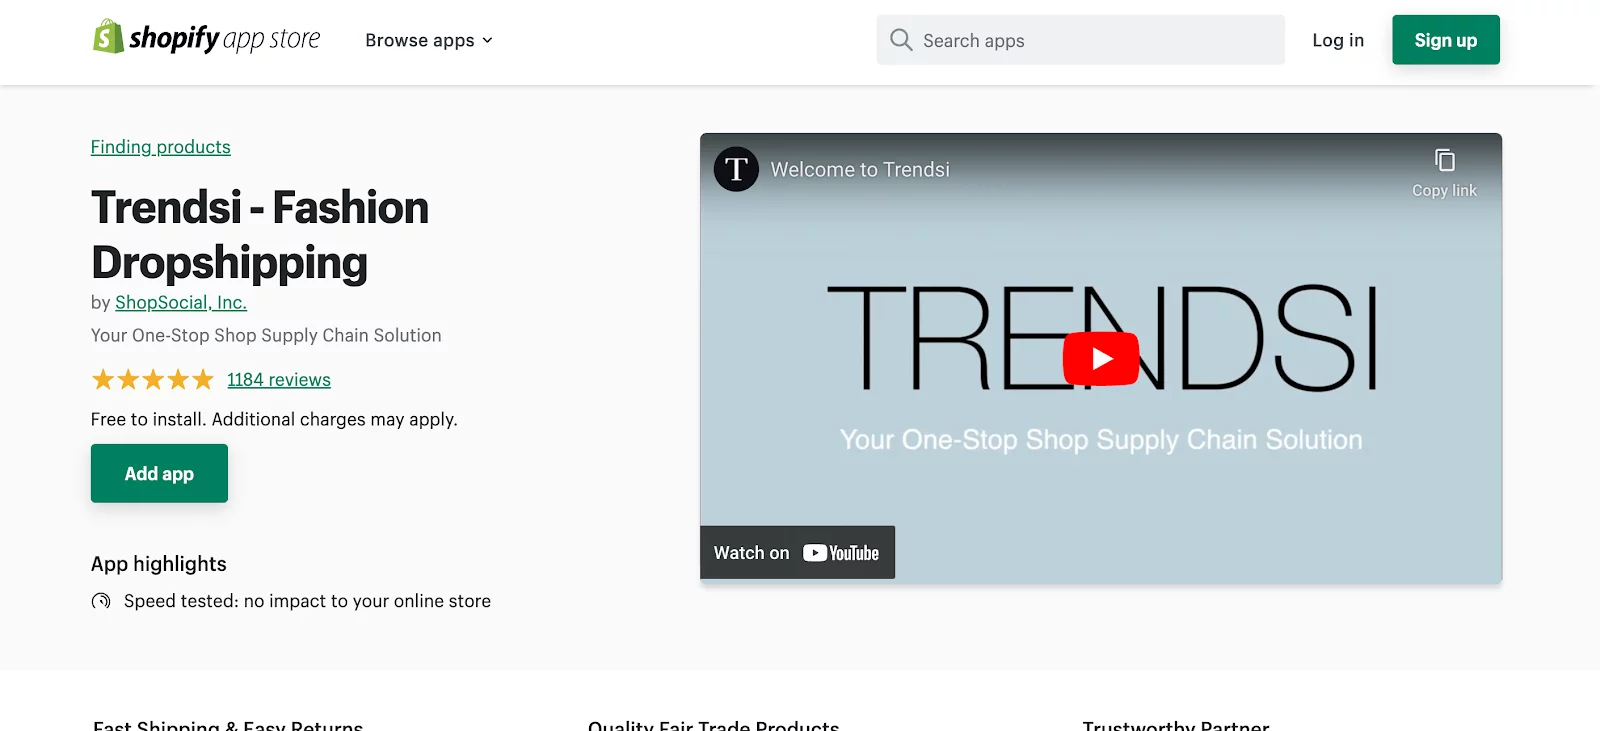 Shopify Apps for Dropshipping - Trendsi Fashion Dropshipping